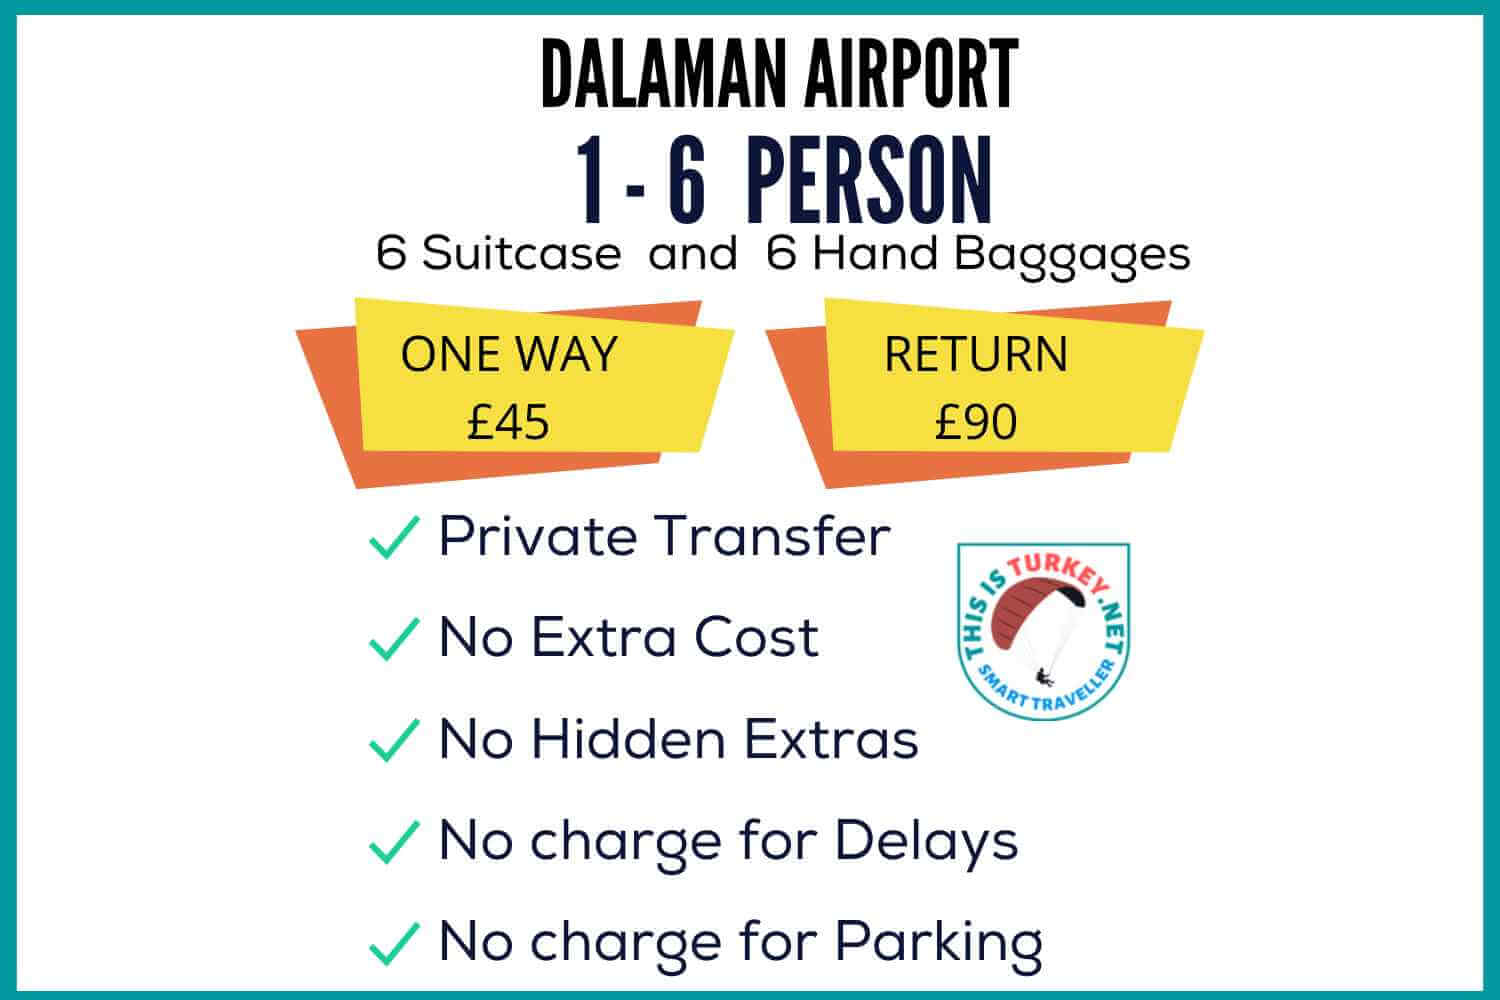 Our Private Transfer service to Hotels in from Dalaman Airport comes with no extra cost and hidden extras. All our Airport Transfer vehicles are comfortable and Airconditioned, and drivers are experienced locals.